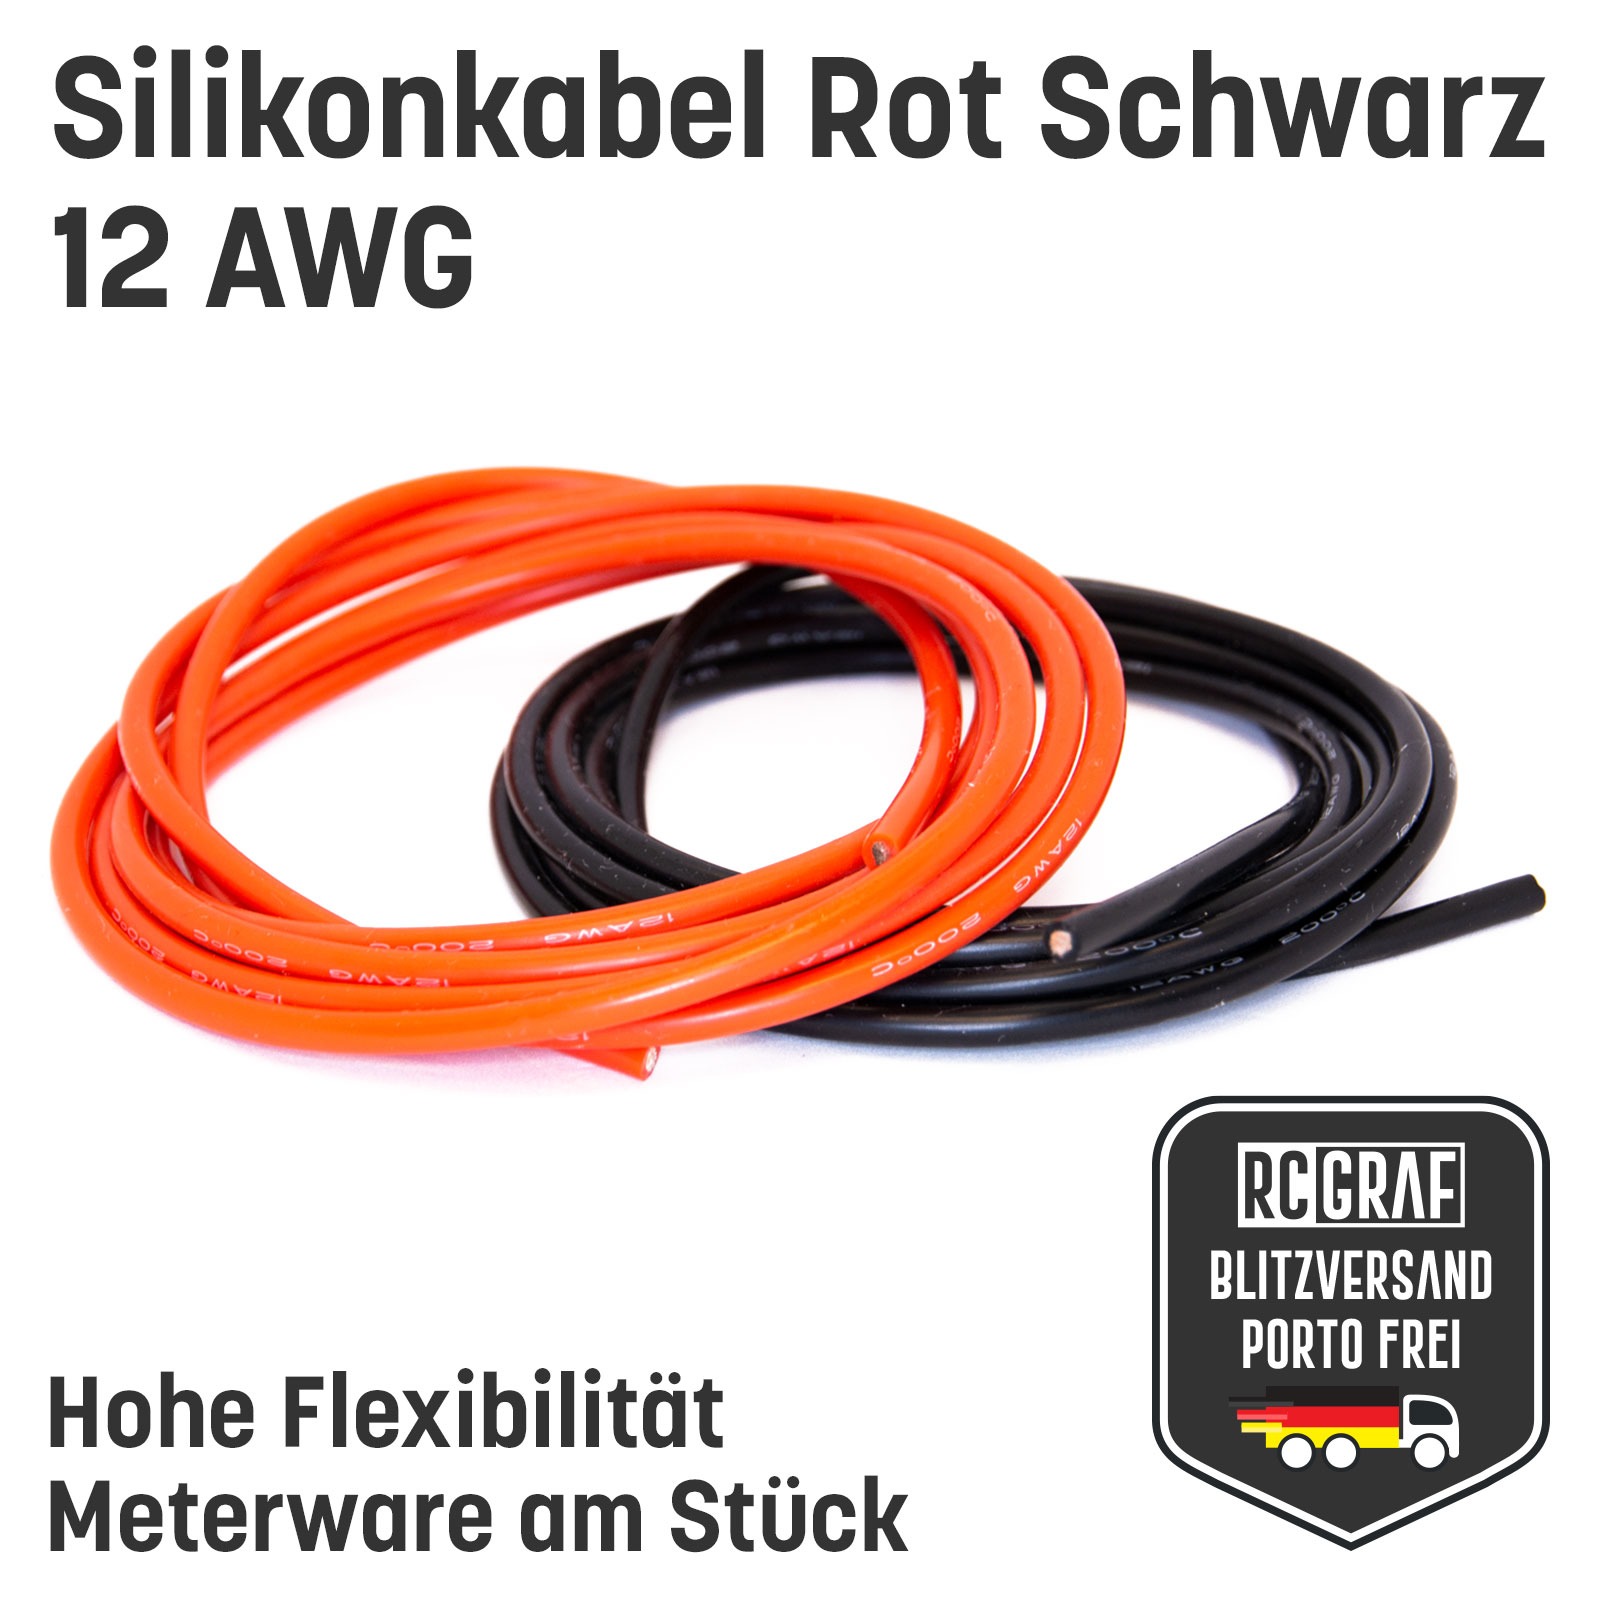 Silicone Cable 12 AWG High Flex Red Black Copper RC Cable